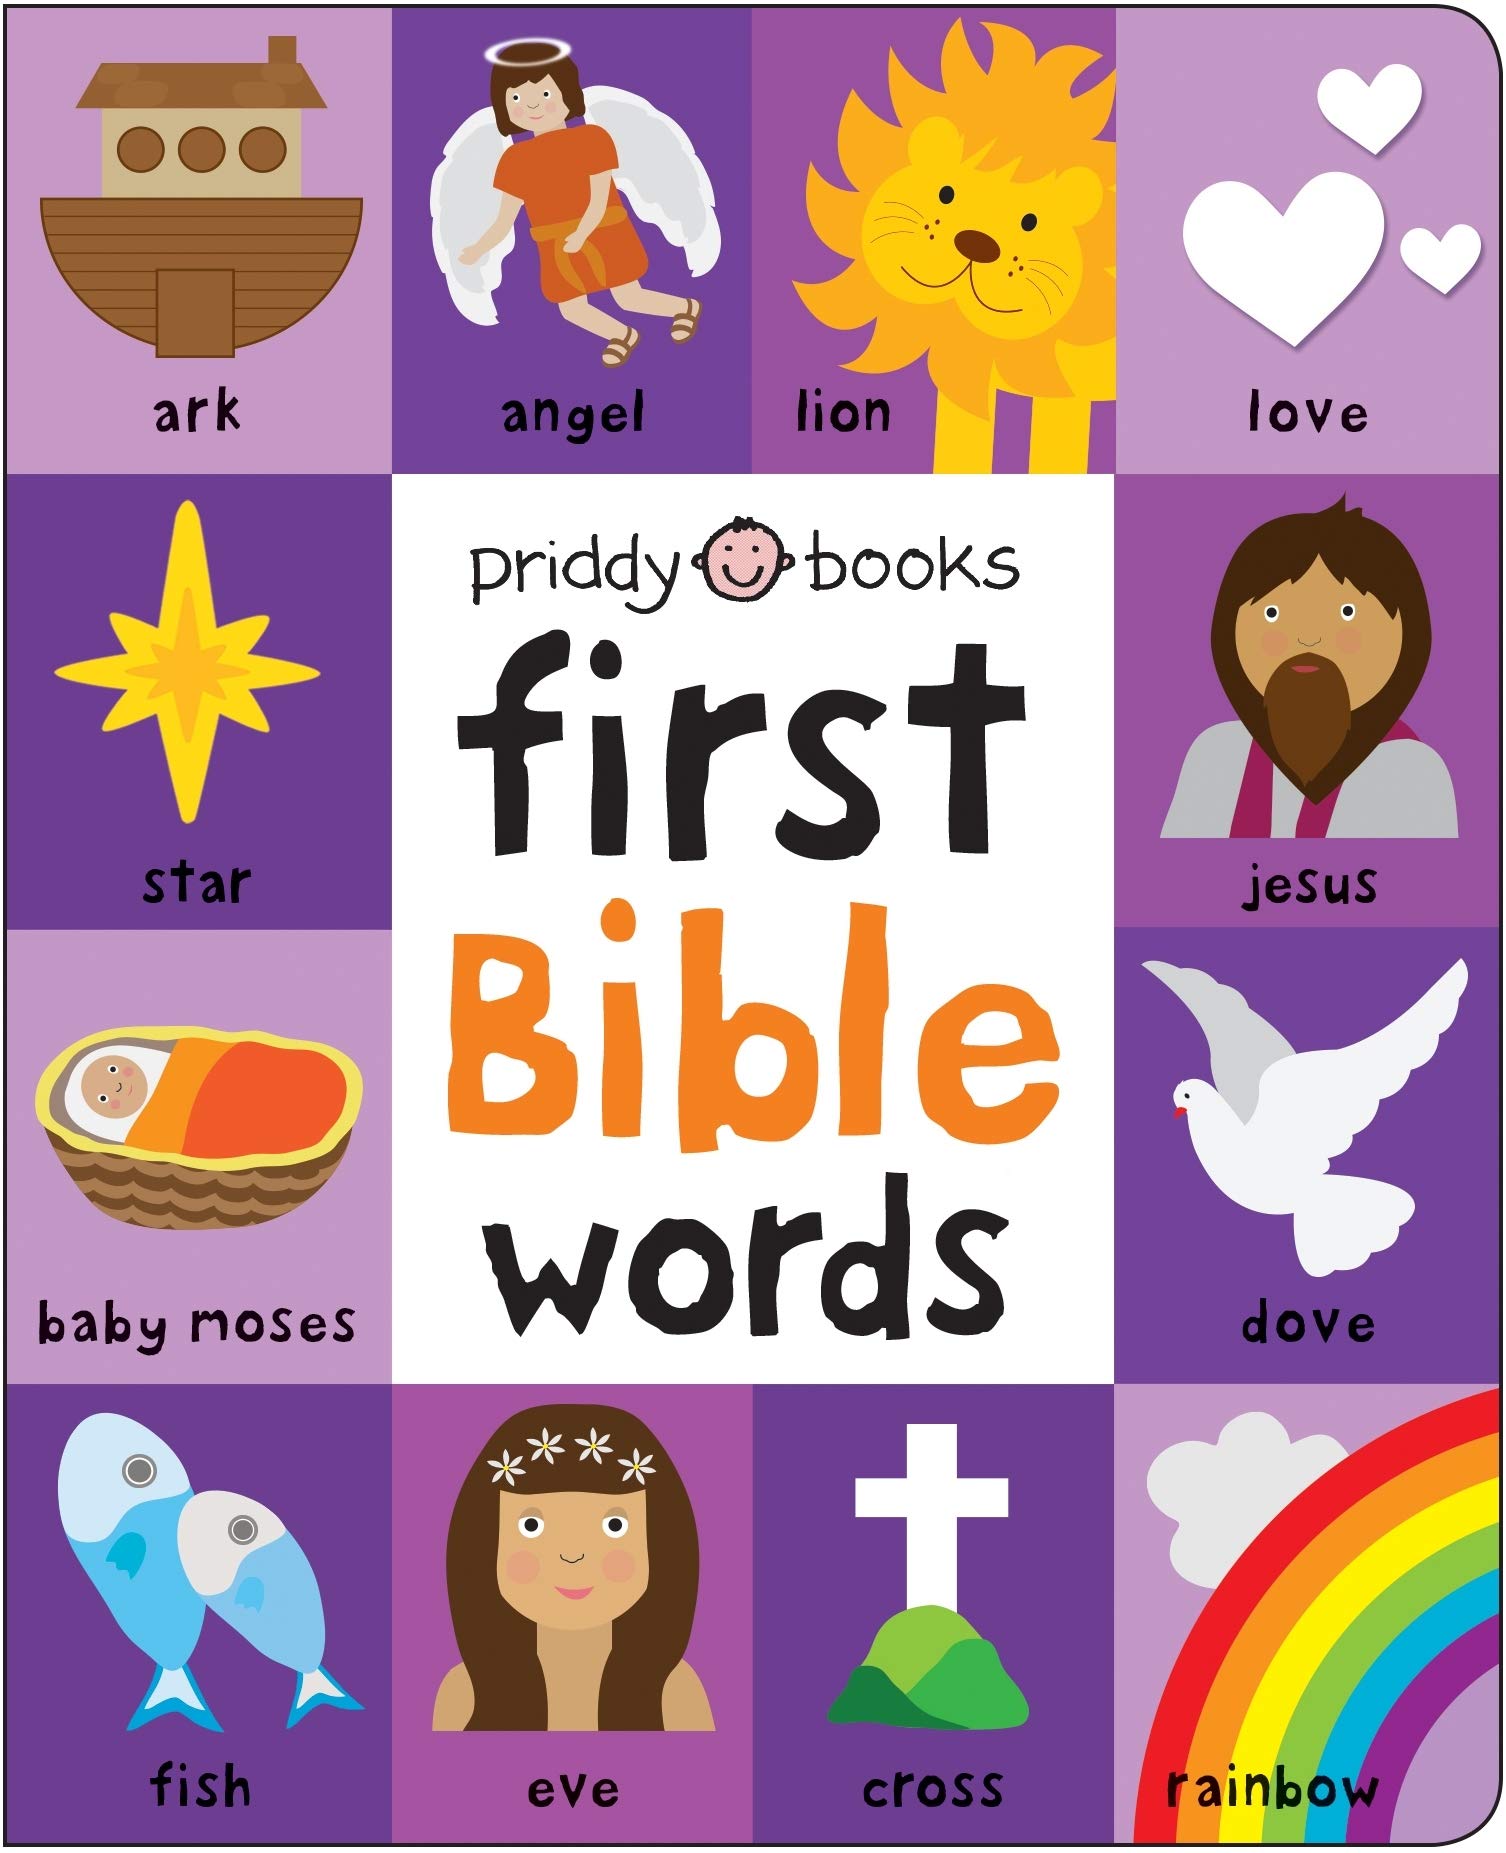 First 100 Bible Words (First 100 Soft To Touch)